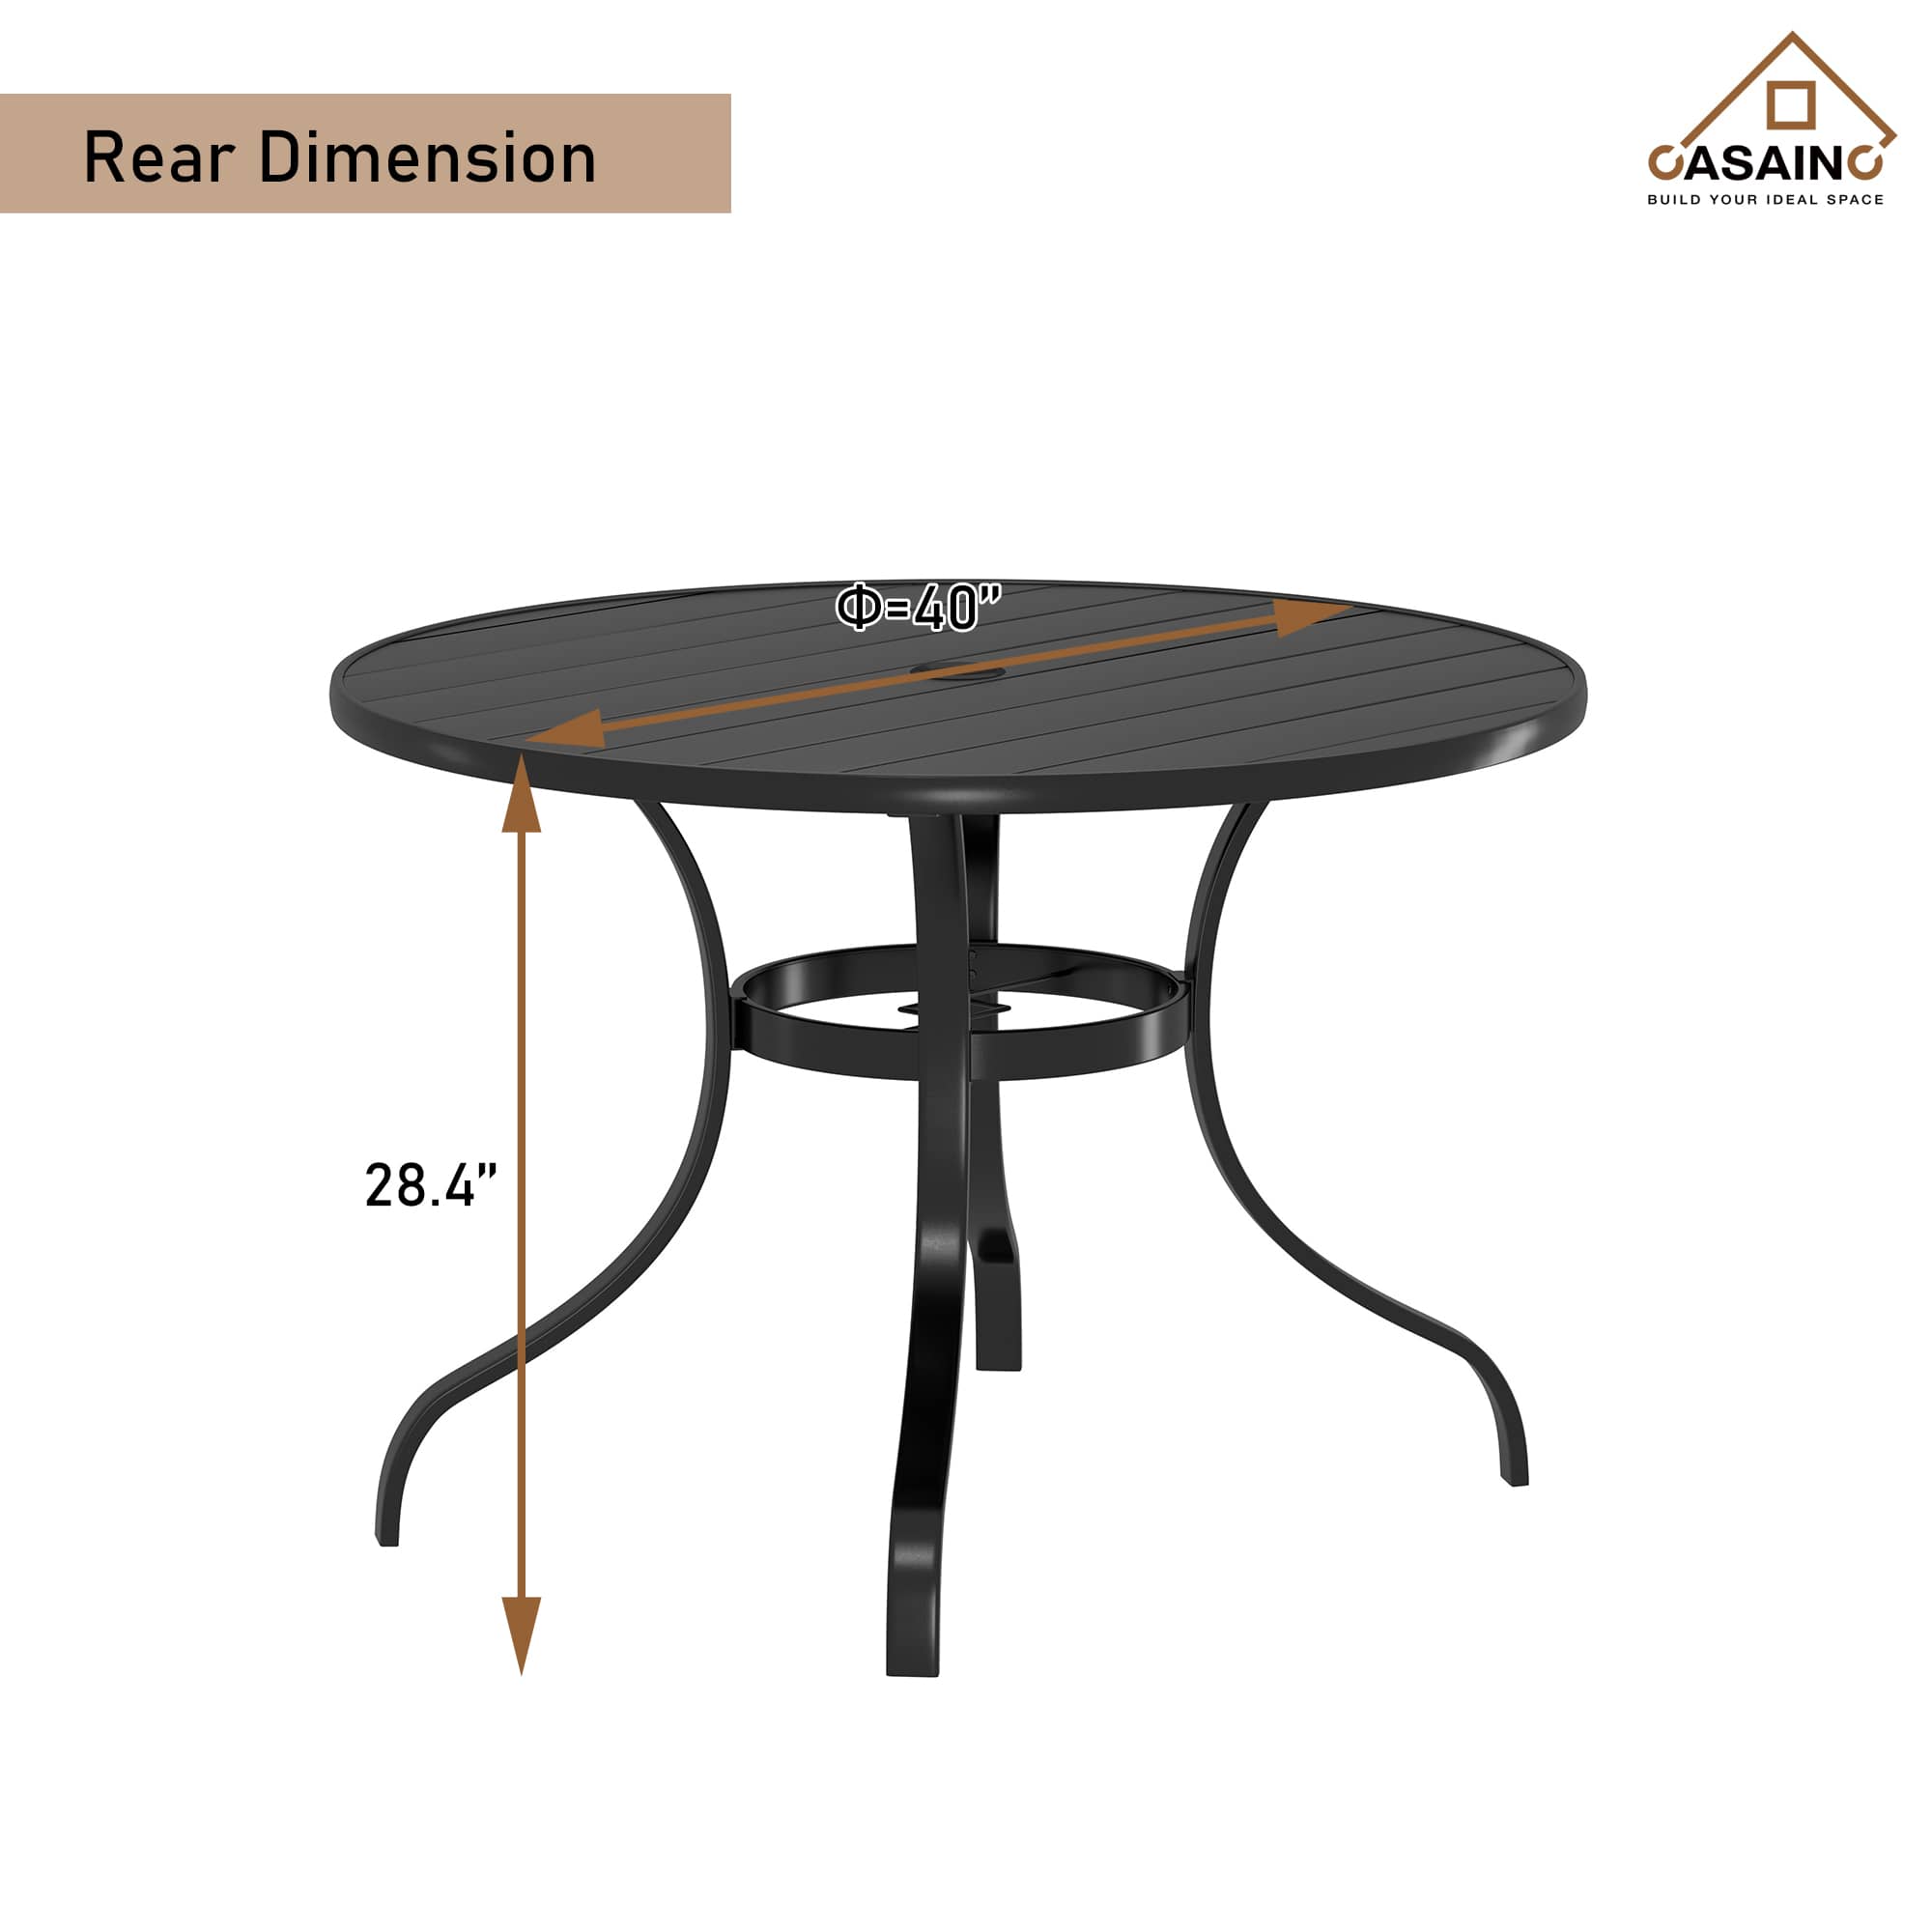 Outdoor Dining Table with Umbrella Hole Dimension Details